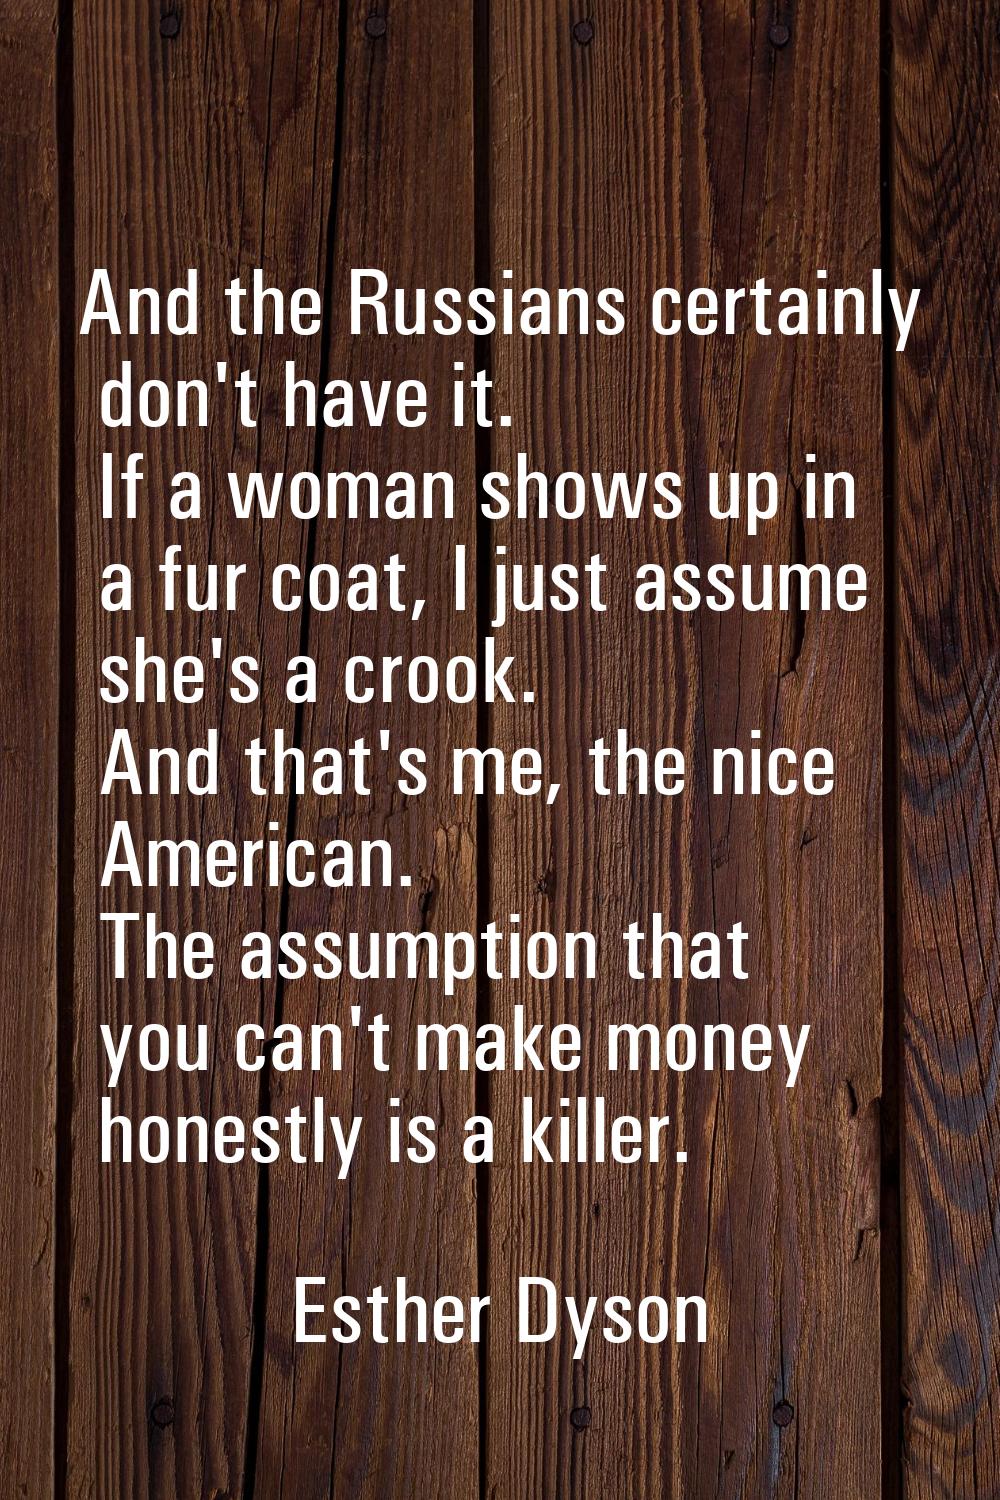 And the Russians certainly don't have it. If a woman shows up in a fur coat, I just assume she's a 